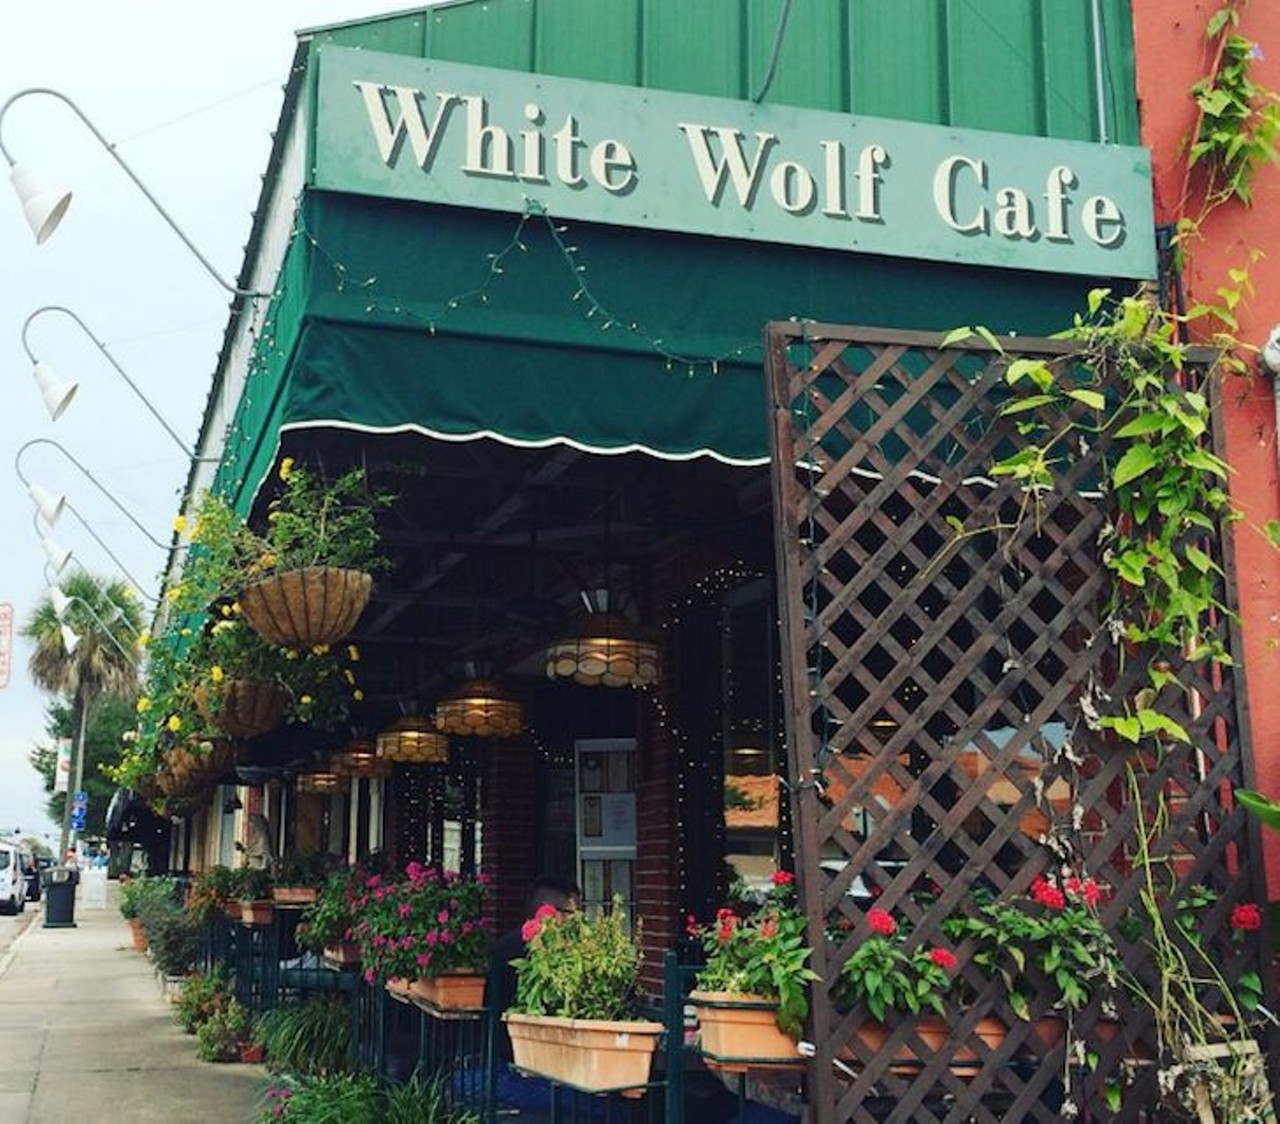 Noon: White Wolf Cafe
1829 N. Orange Ave., Sat: 8 a.m. - 10 p.m. Sun: 8 a.m. - 3 p.m. 
What to order: Snag a Chipotle Bloody Mary and energize with a gourmet coffee
So, you&#146;ve finally decided your wits need a solid testing. Perhaps you are capable of knocking this 4-kilometer drink-cathalon out of the park, it&#146;s too early to tell. Nonetheless, let us first get some breakfast in before truly toeing the line of acceptable public inebriation. If the wait is long, as this spot is known to produce a line, then run north to your second stop during the delay to snag a quick pre-meal liquified snack.   
Photo via hollyhieu/Instagram